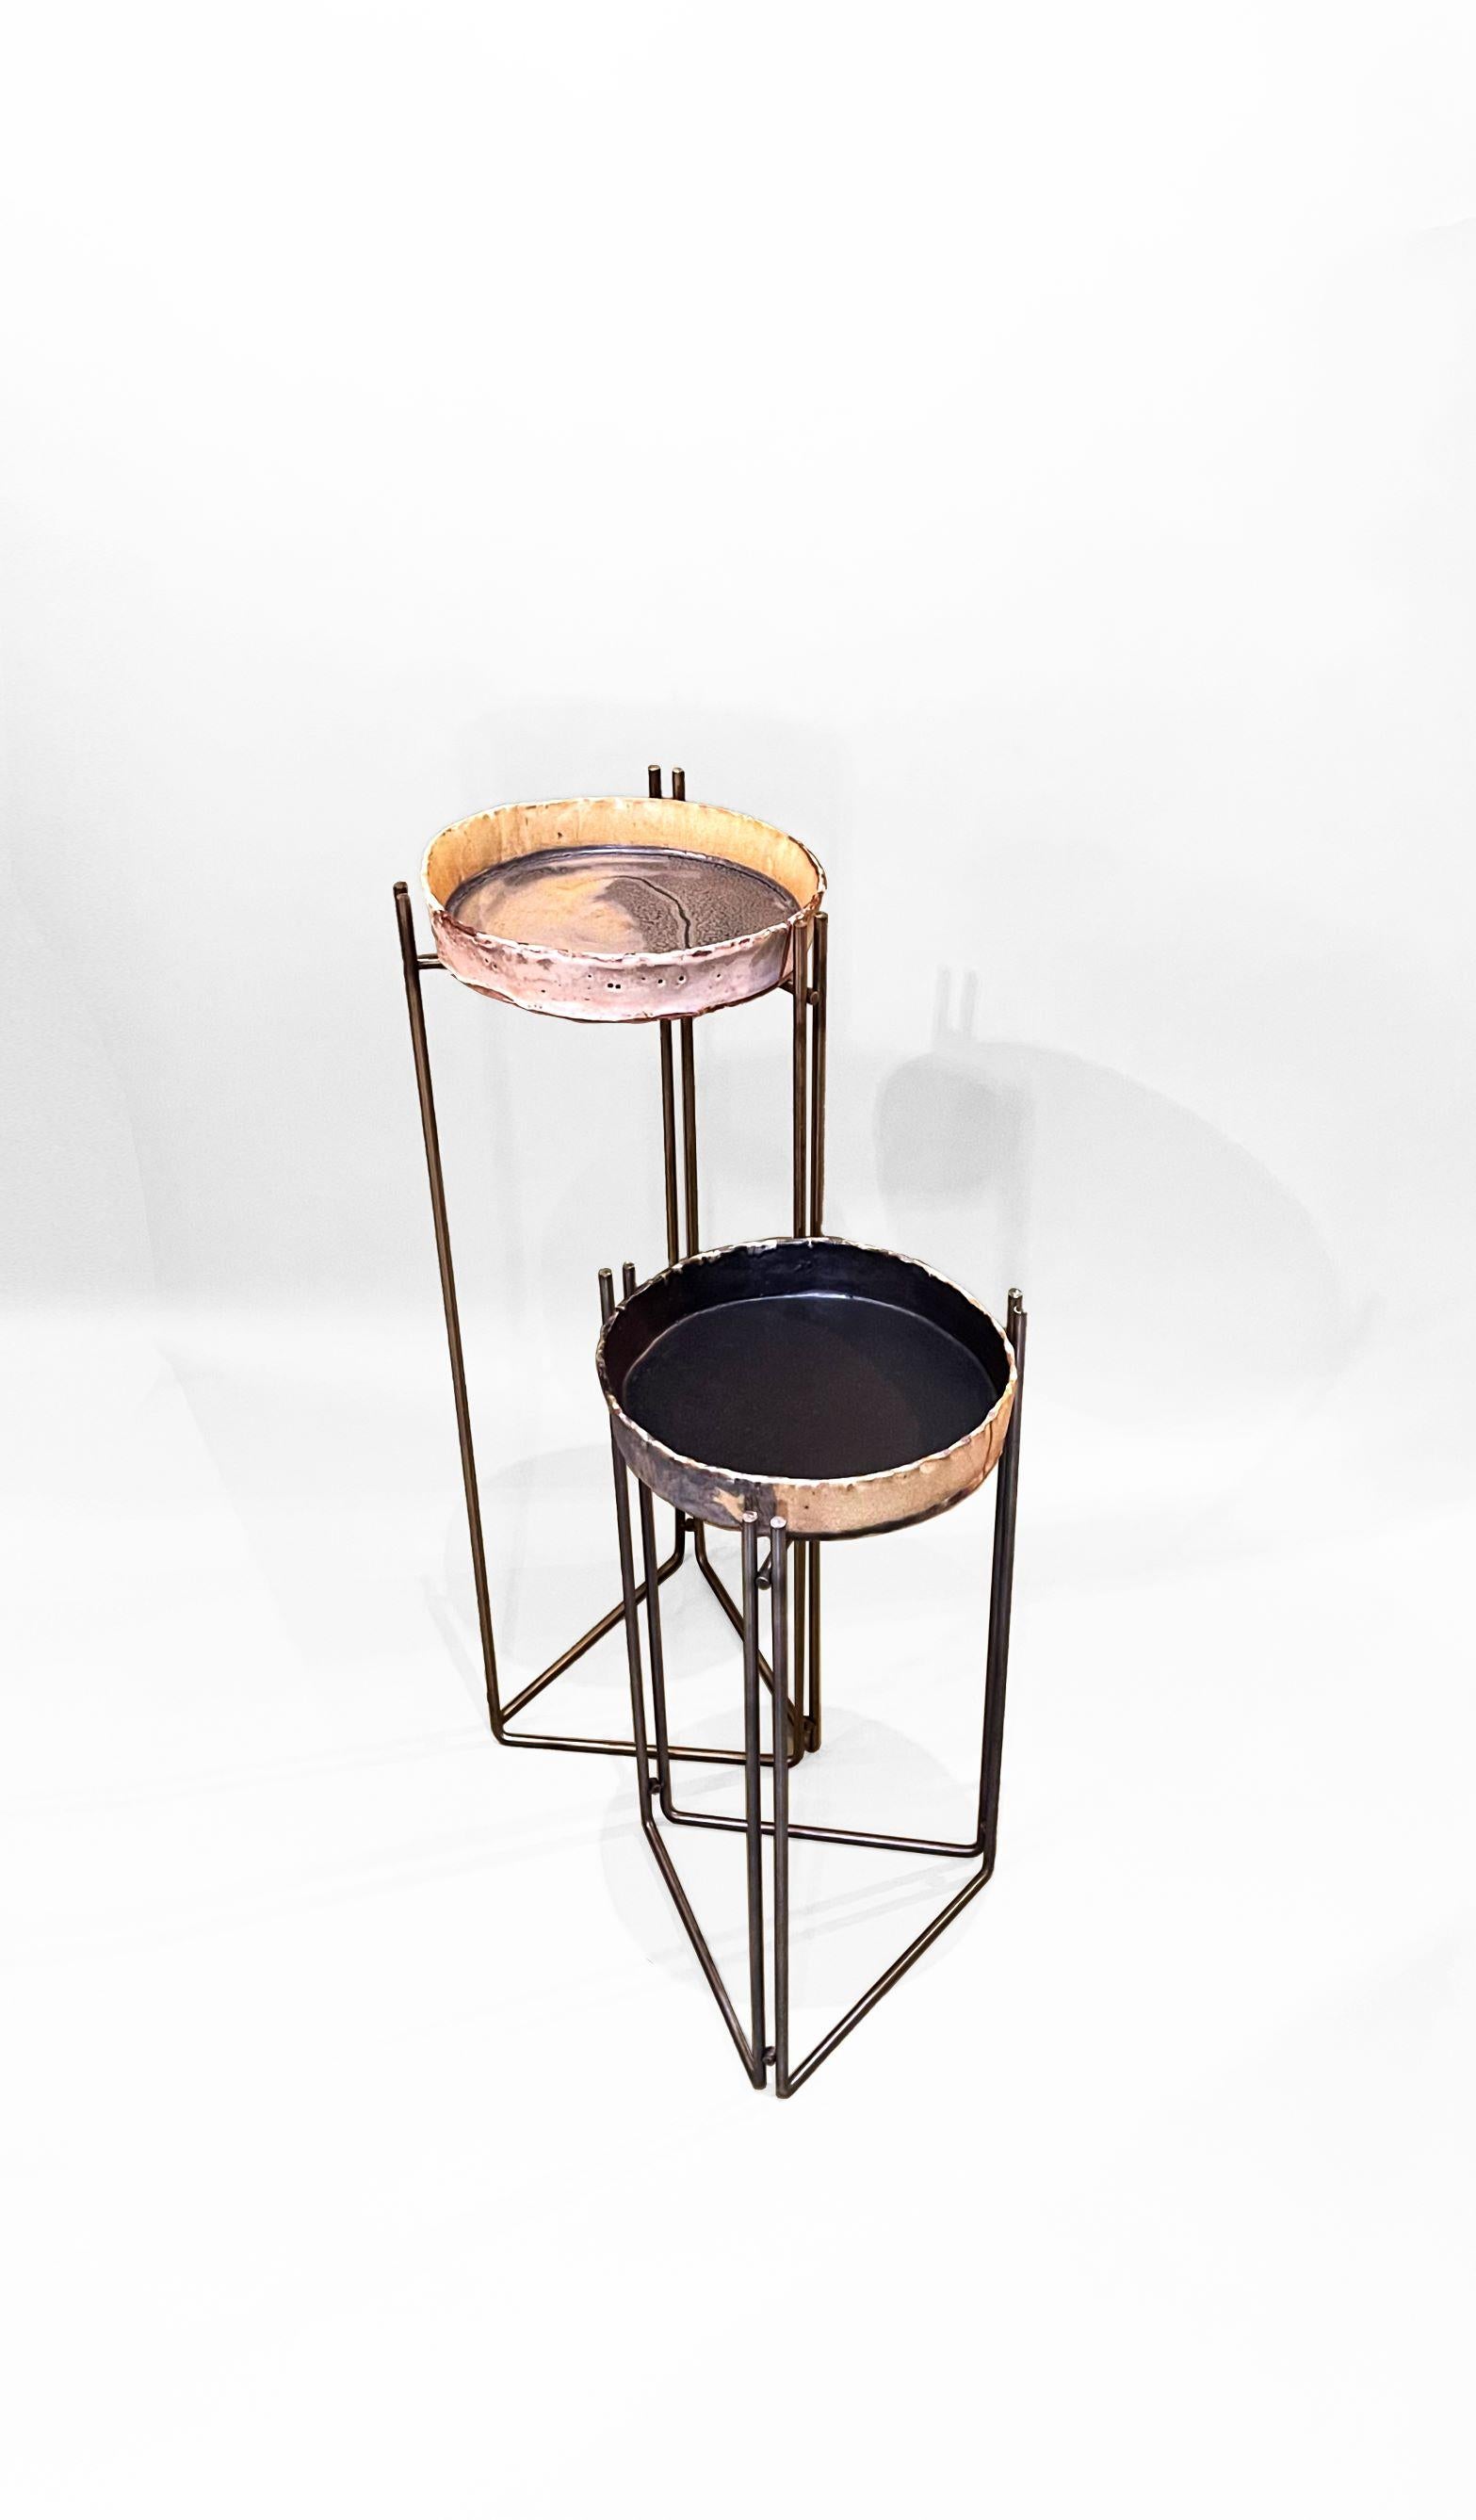 Hand-Painted Pair of Martini Tables Ceramic Top & S Steel by Hannelore Freer and Filipe Ramos For Sale